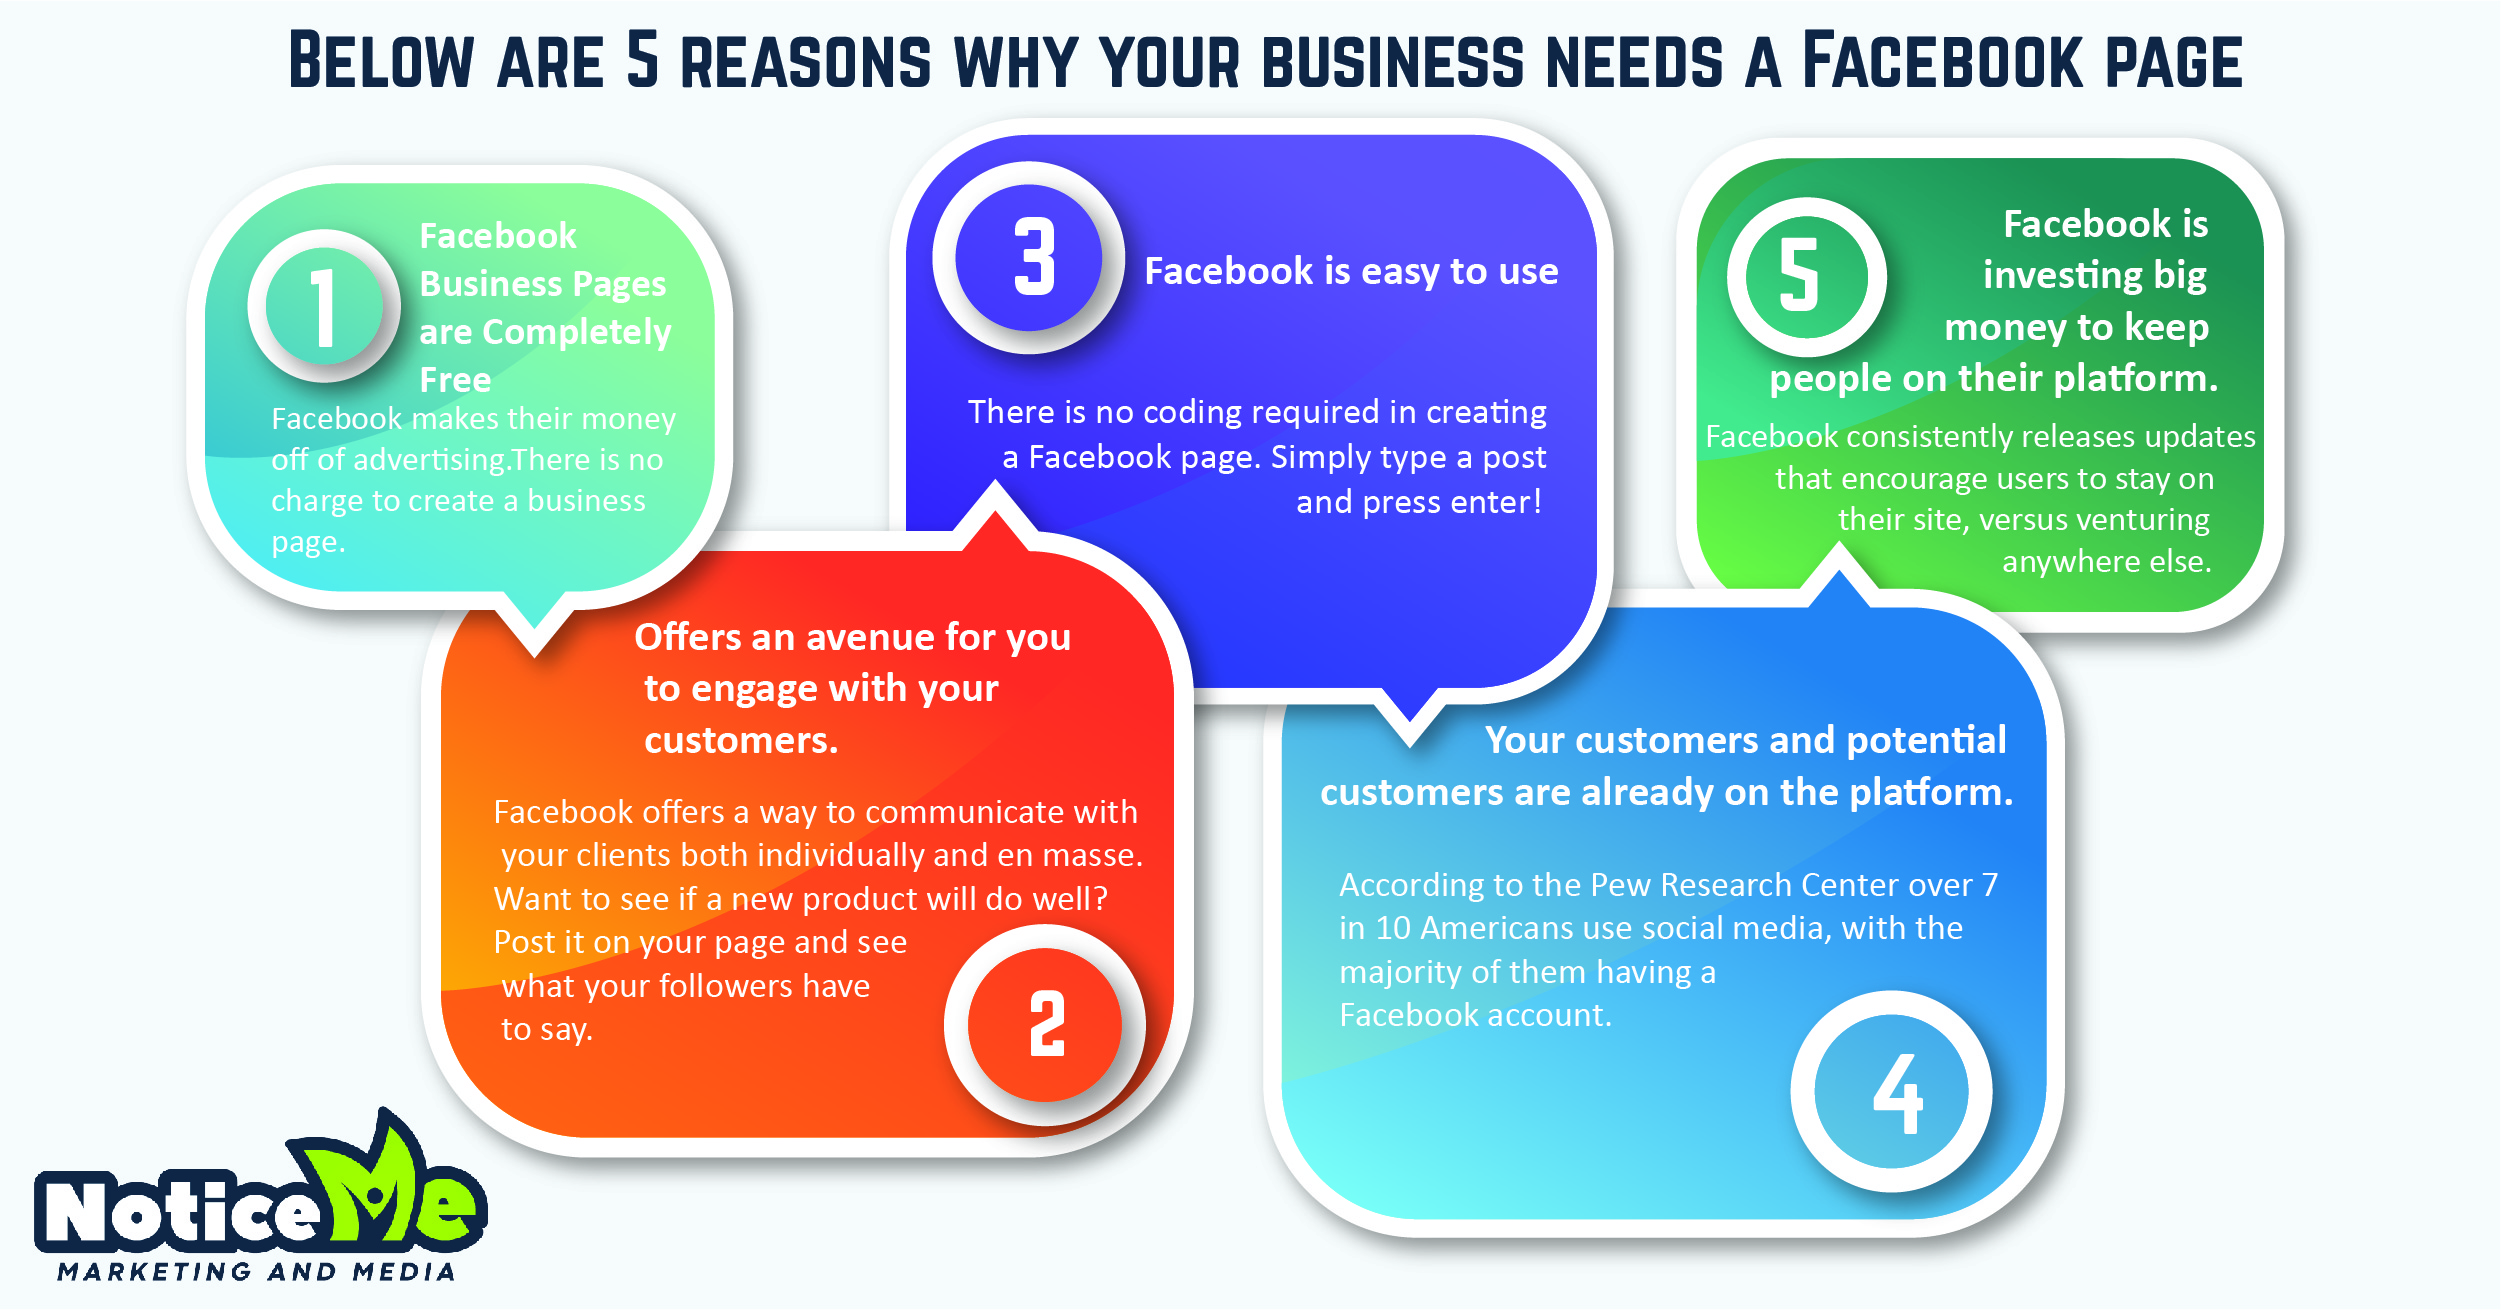 5 Reasons Your Business Needs a Facebook Page